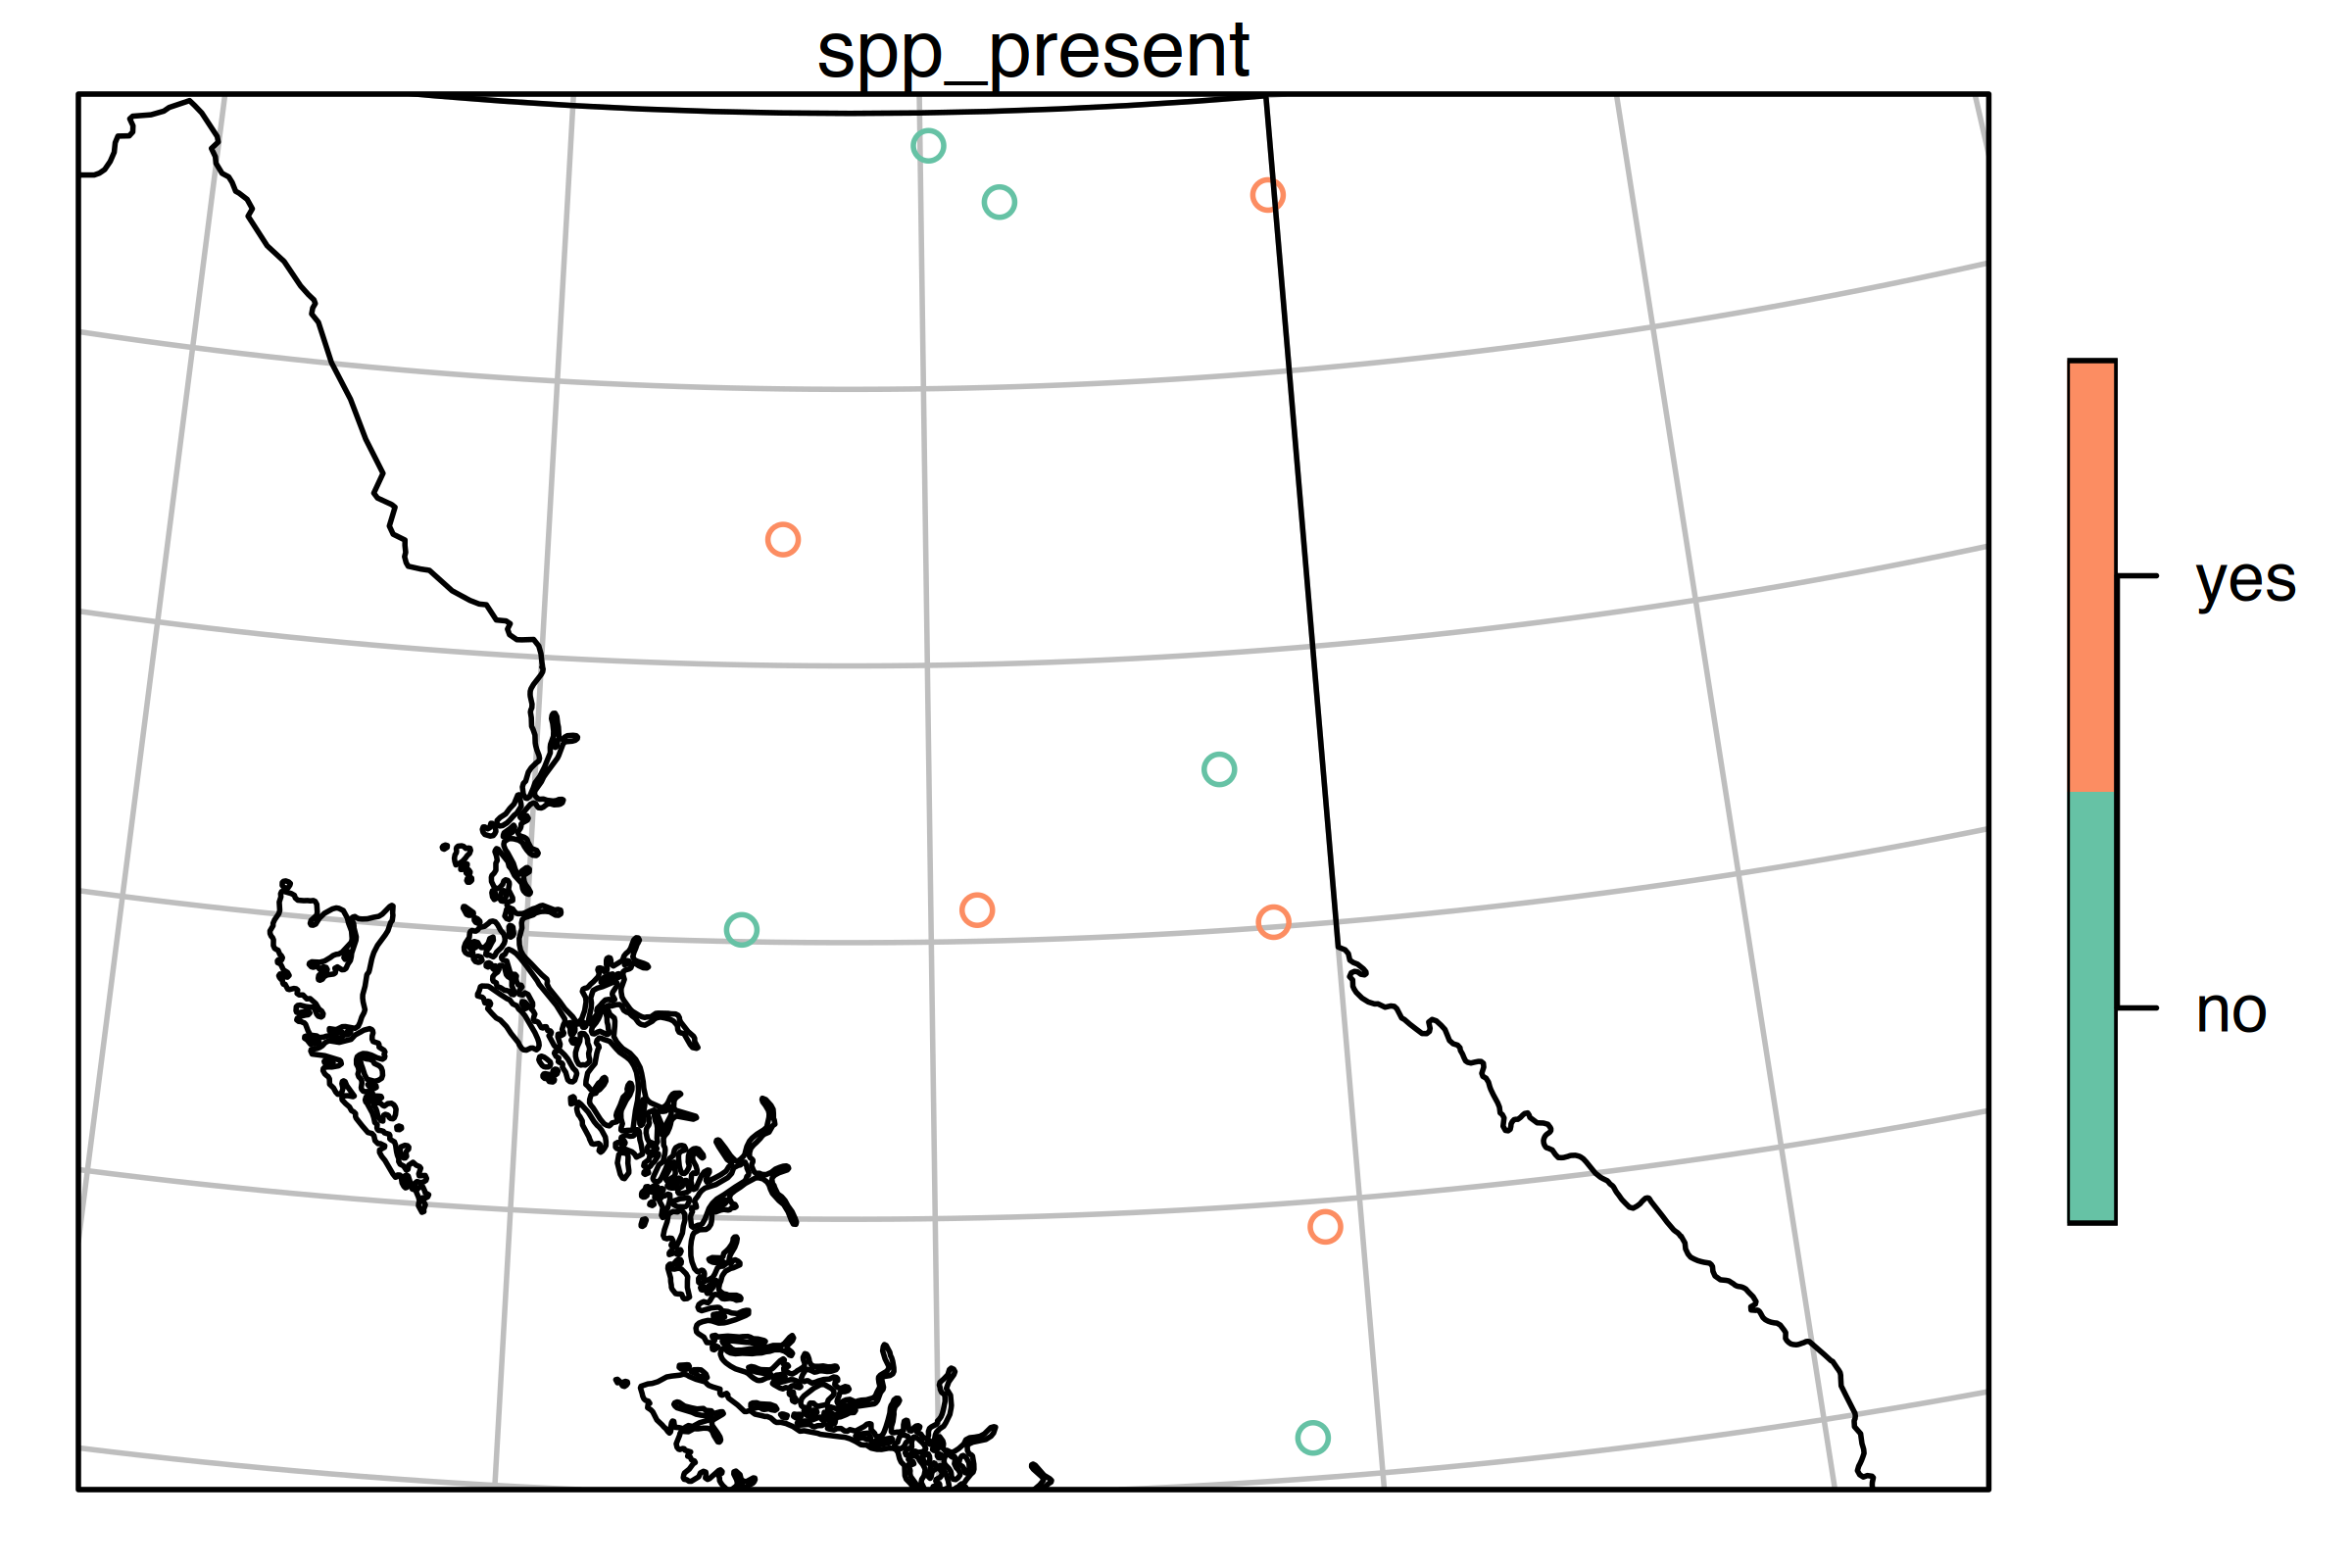 The same random coloured points as before, now overlaid on a map of British Columbia.